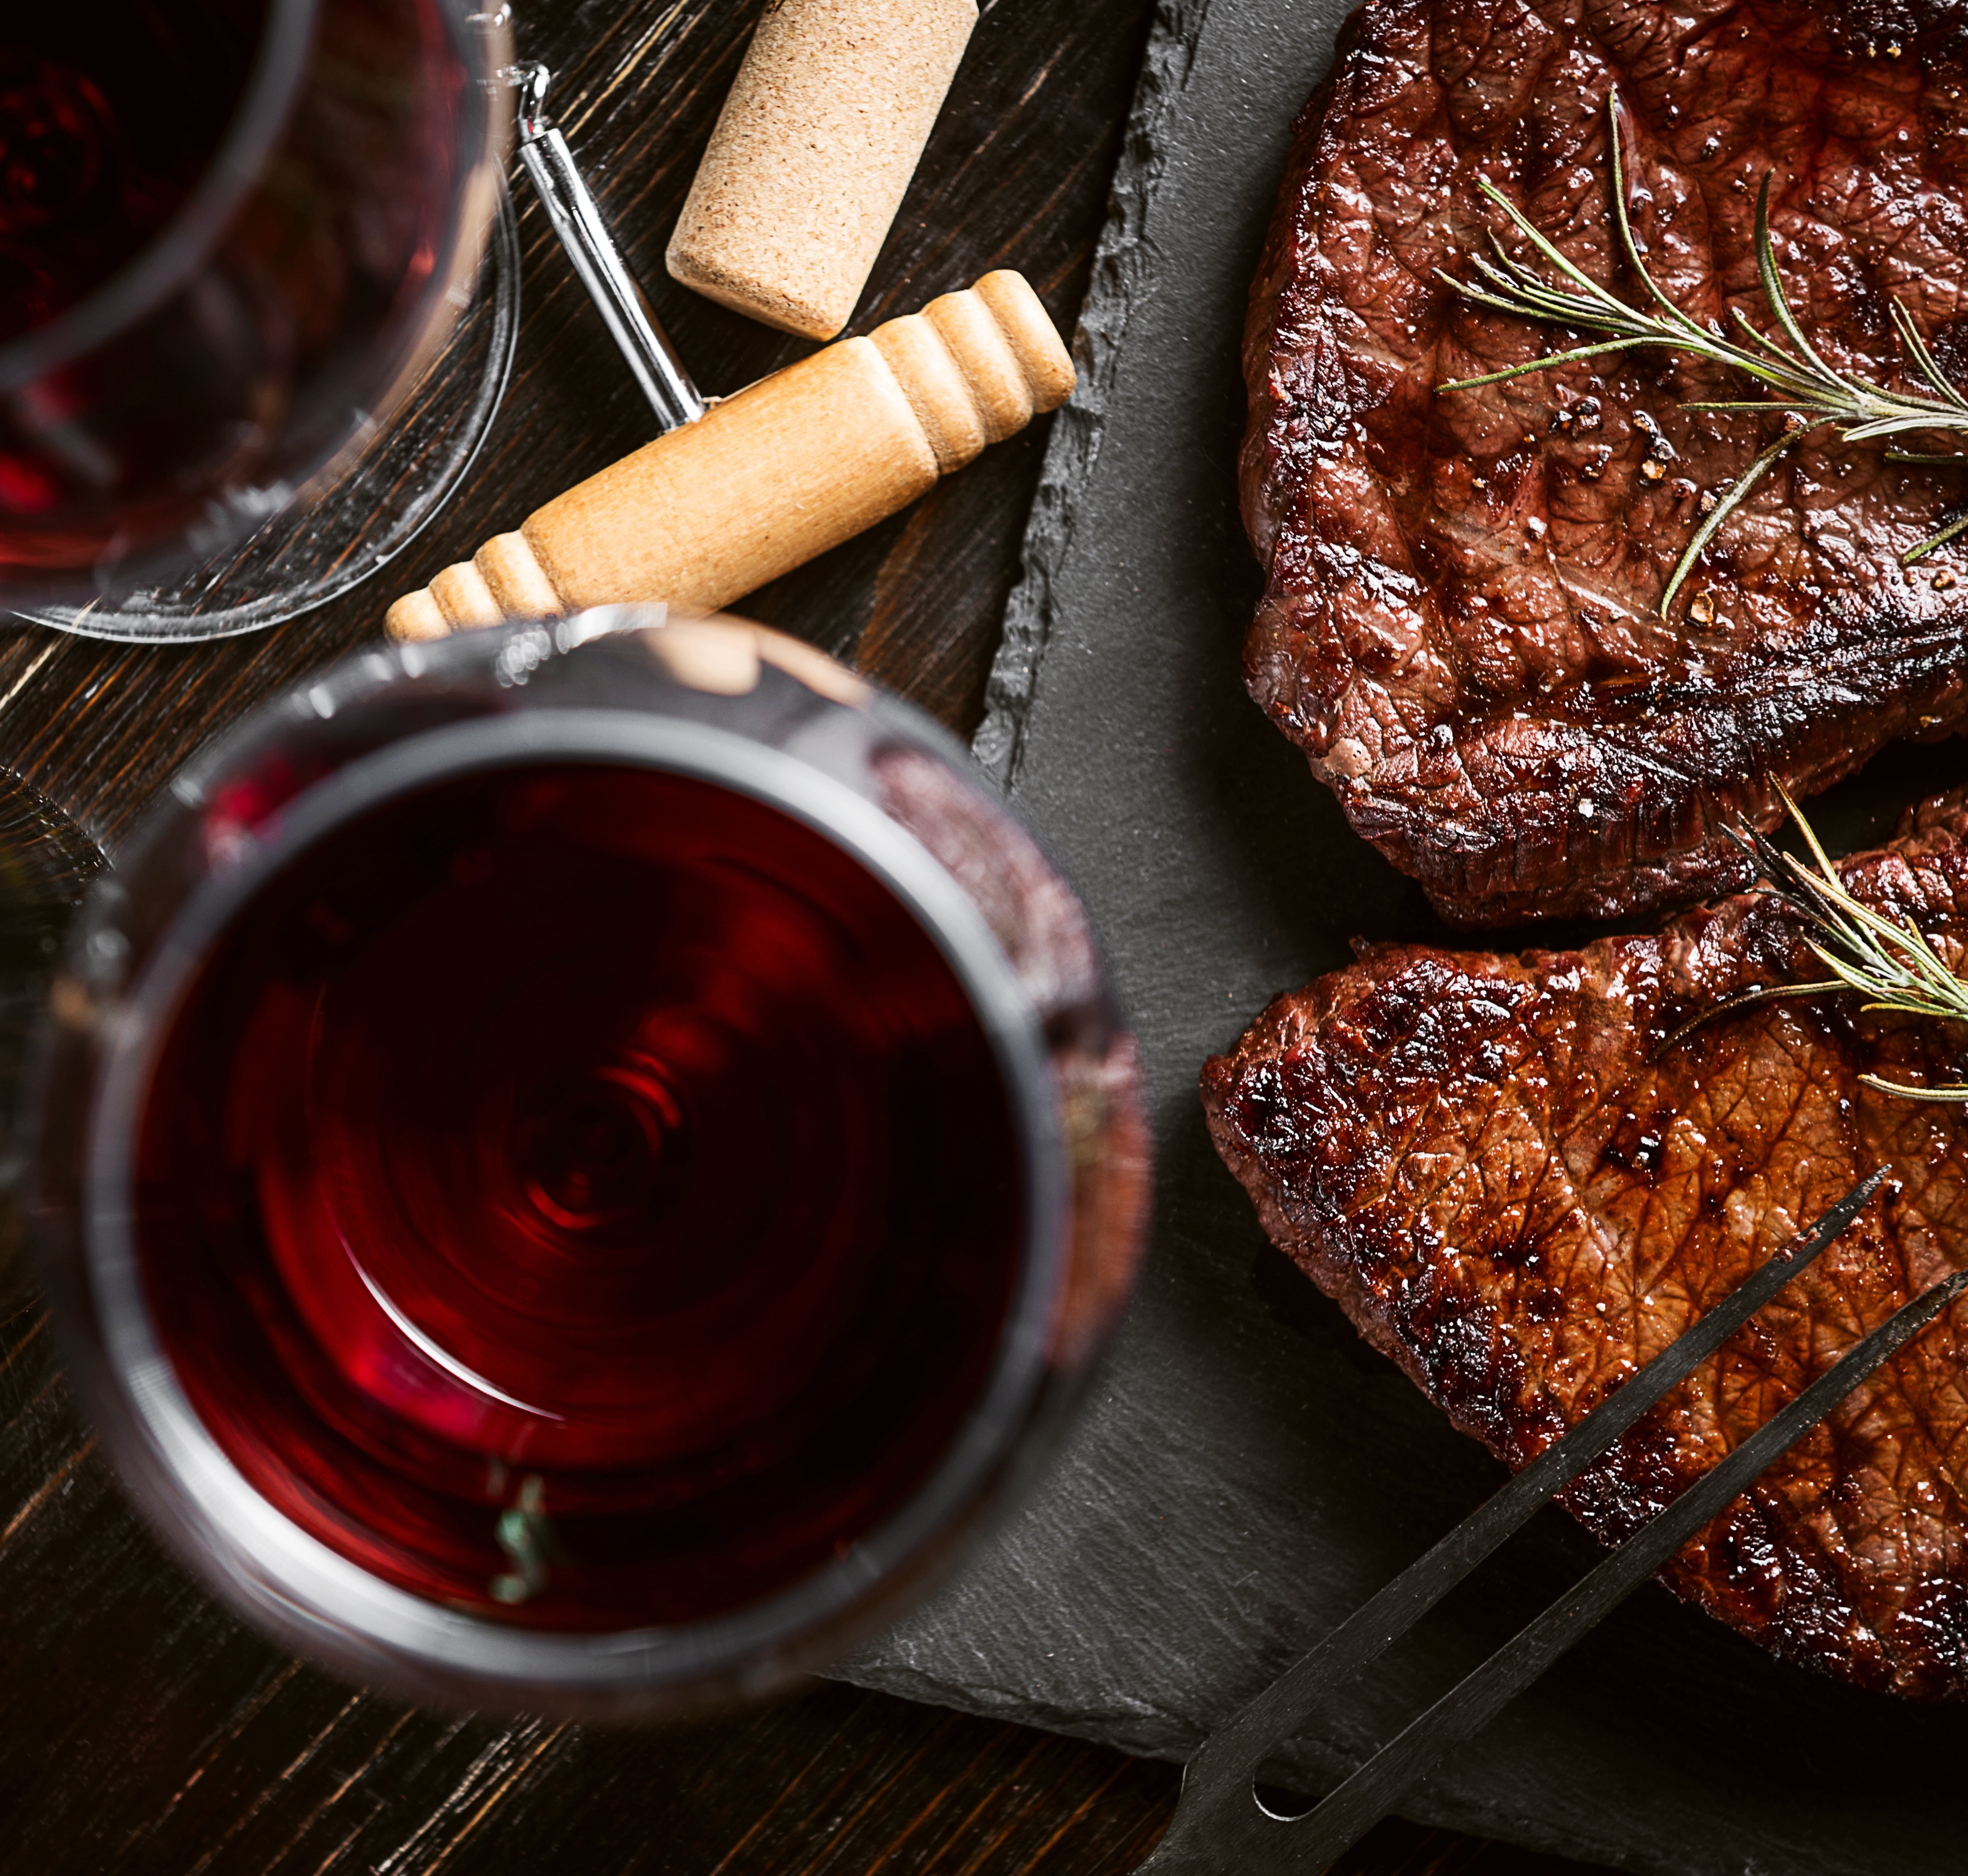 From Plate To Palate: The Best Steak & Wine Pairings to Elevate Your Meal